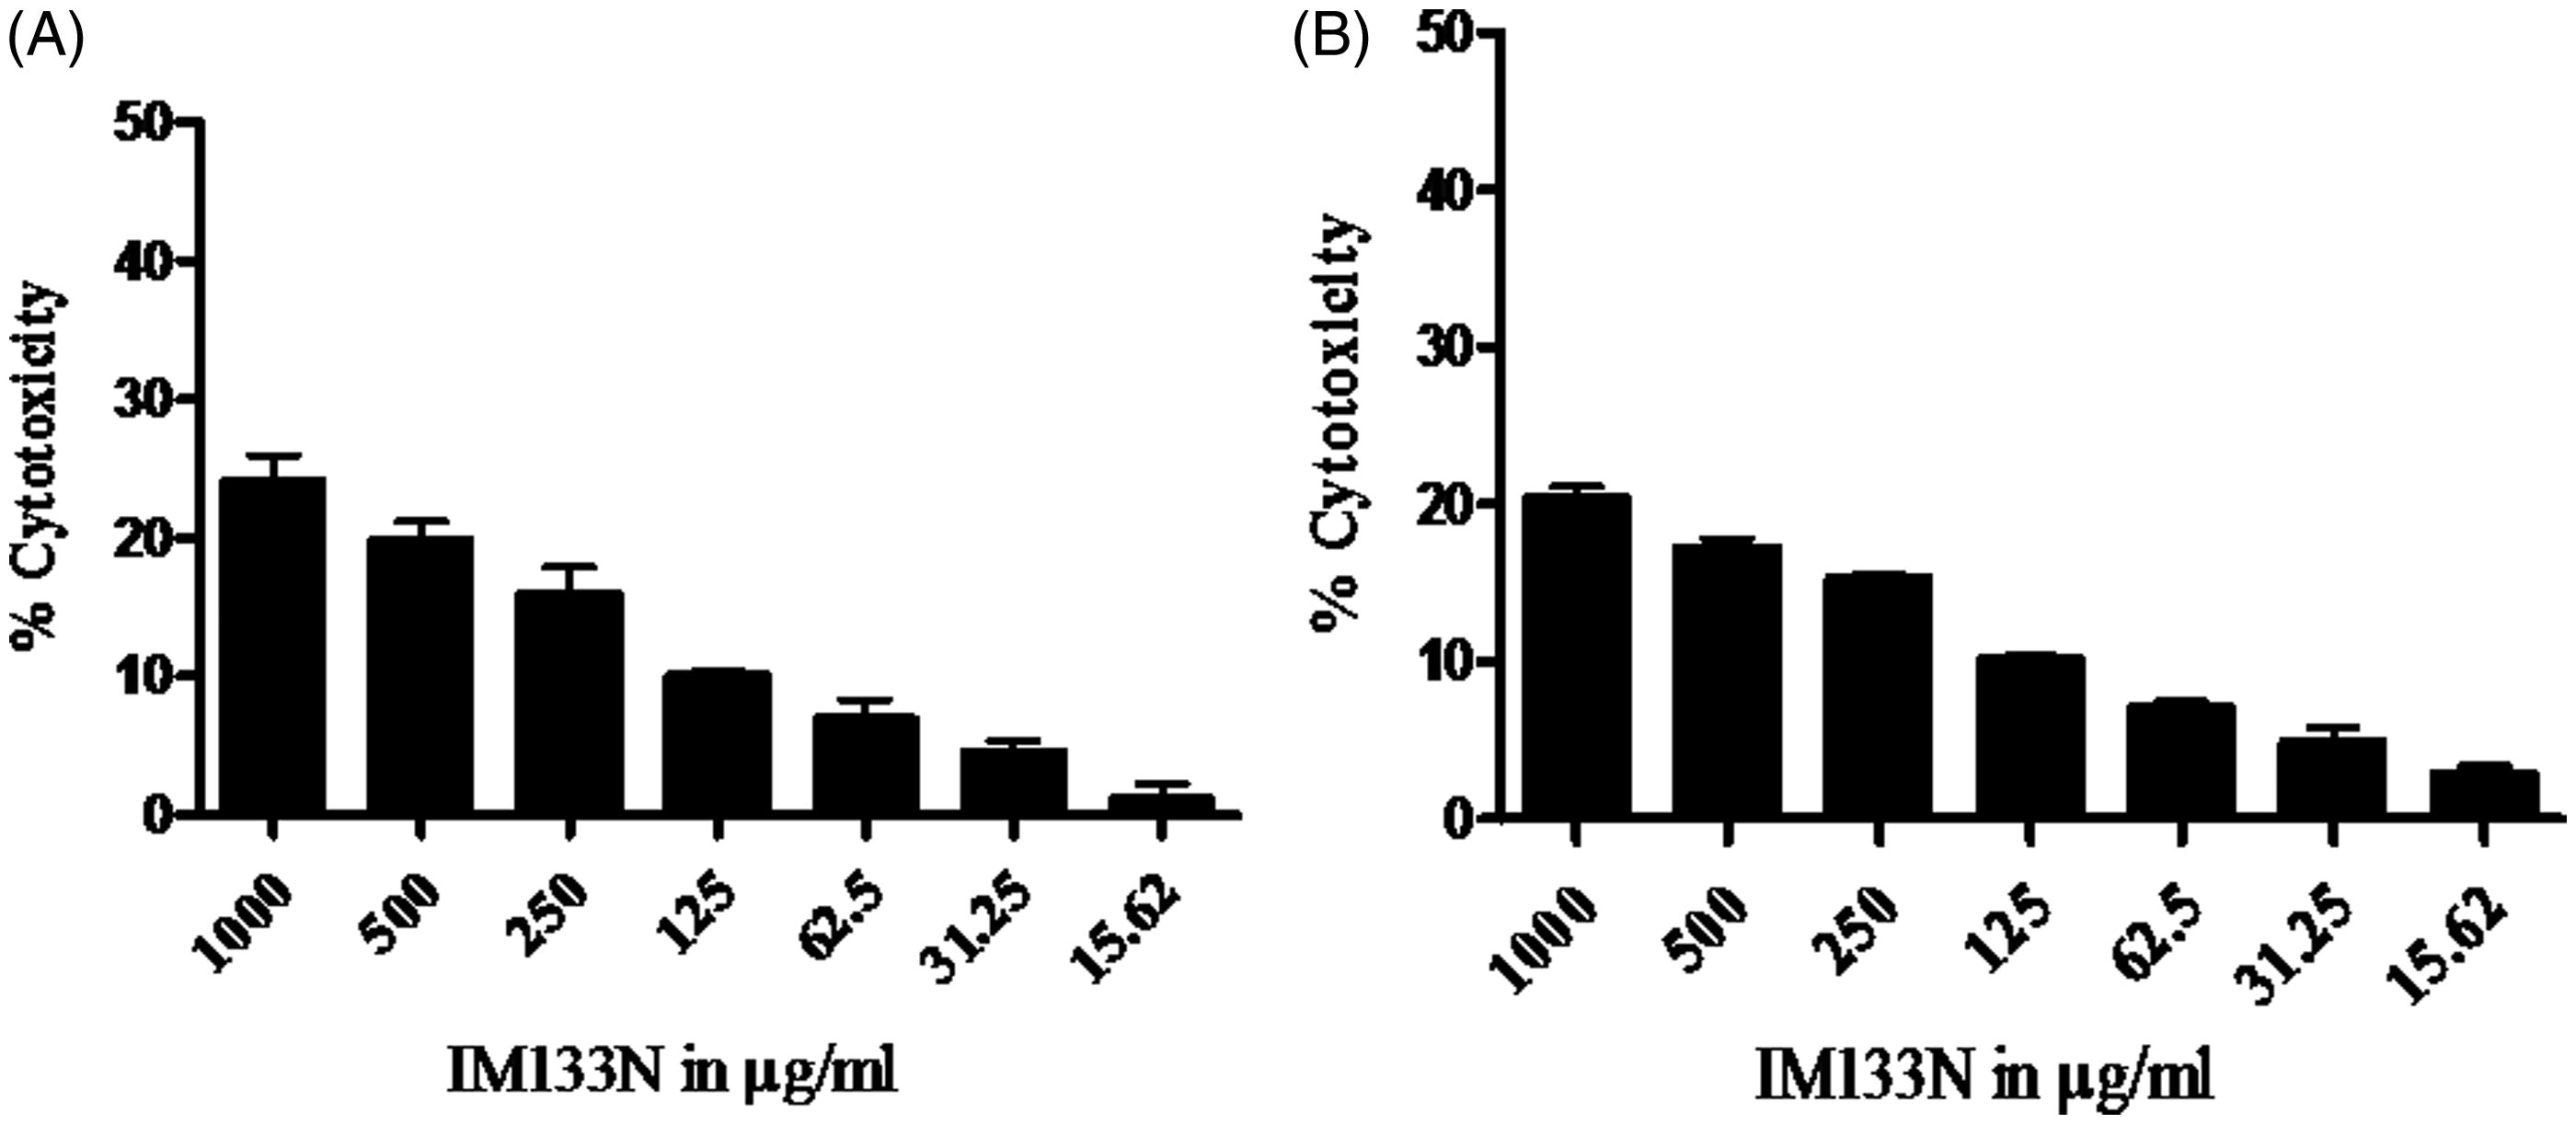 Figure 2. Cytotoxicity of IM-133N on (a) RAW264.7 and (b) THP-1 cells. Cells were incubated for 24 h with differing concentrations of IM-133N and cell viability was then determined using an MTT assay. Data are expressed as mean (±SE) cytotoxicity (i.e. percentage reduction in viable cell number vs control) from three assays using n = 3 samples/IM-133N concentration.